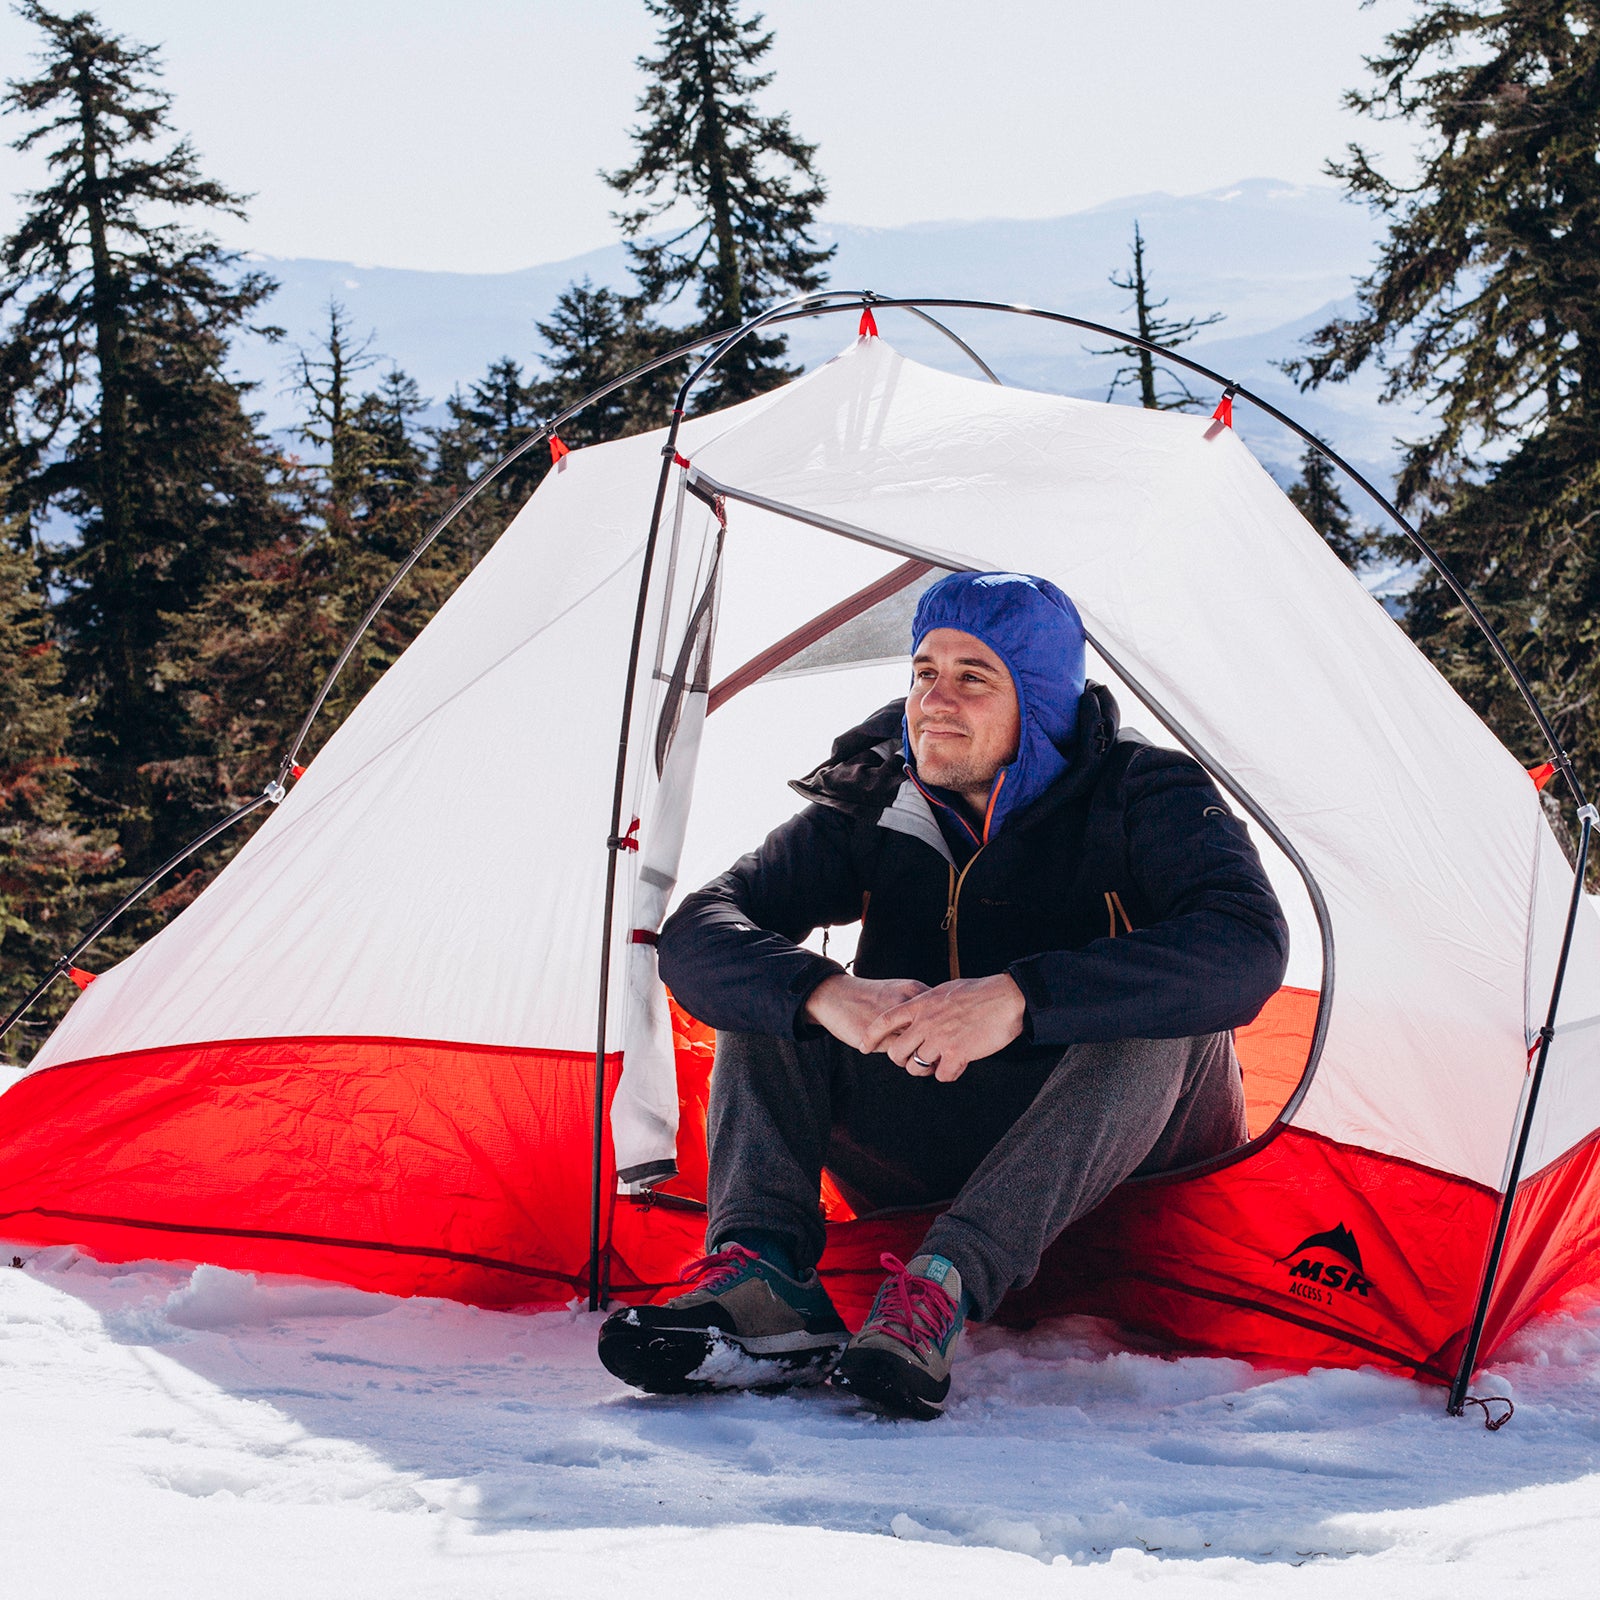 How to Backcountry Camp in the Winter